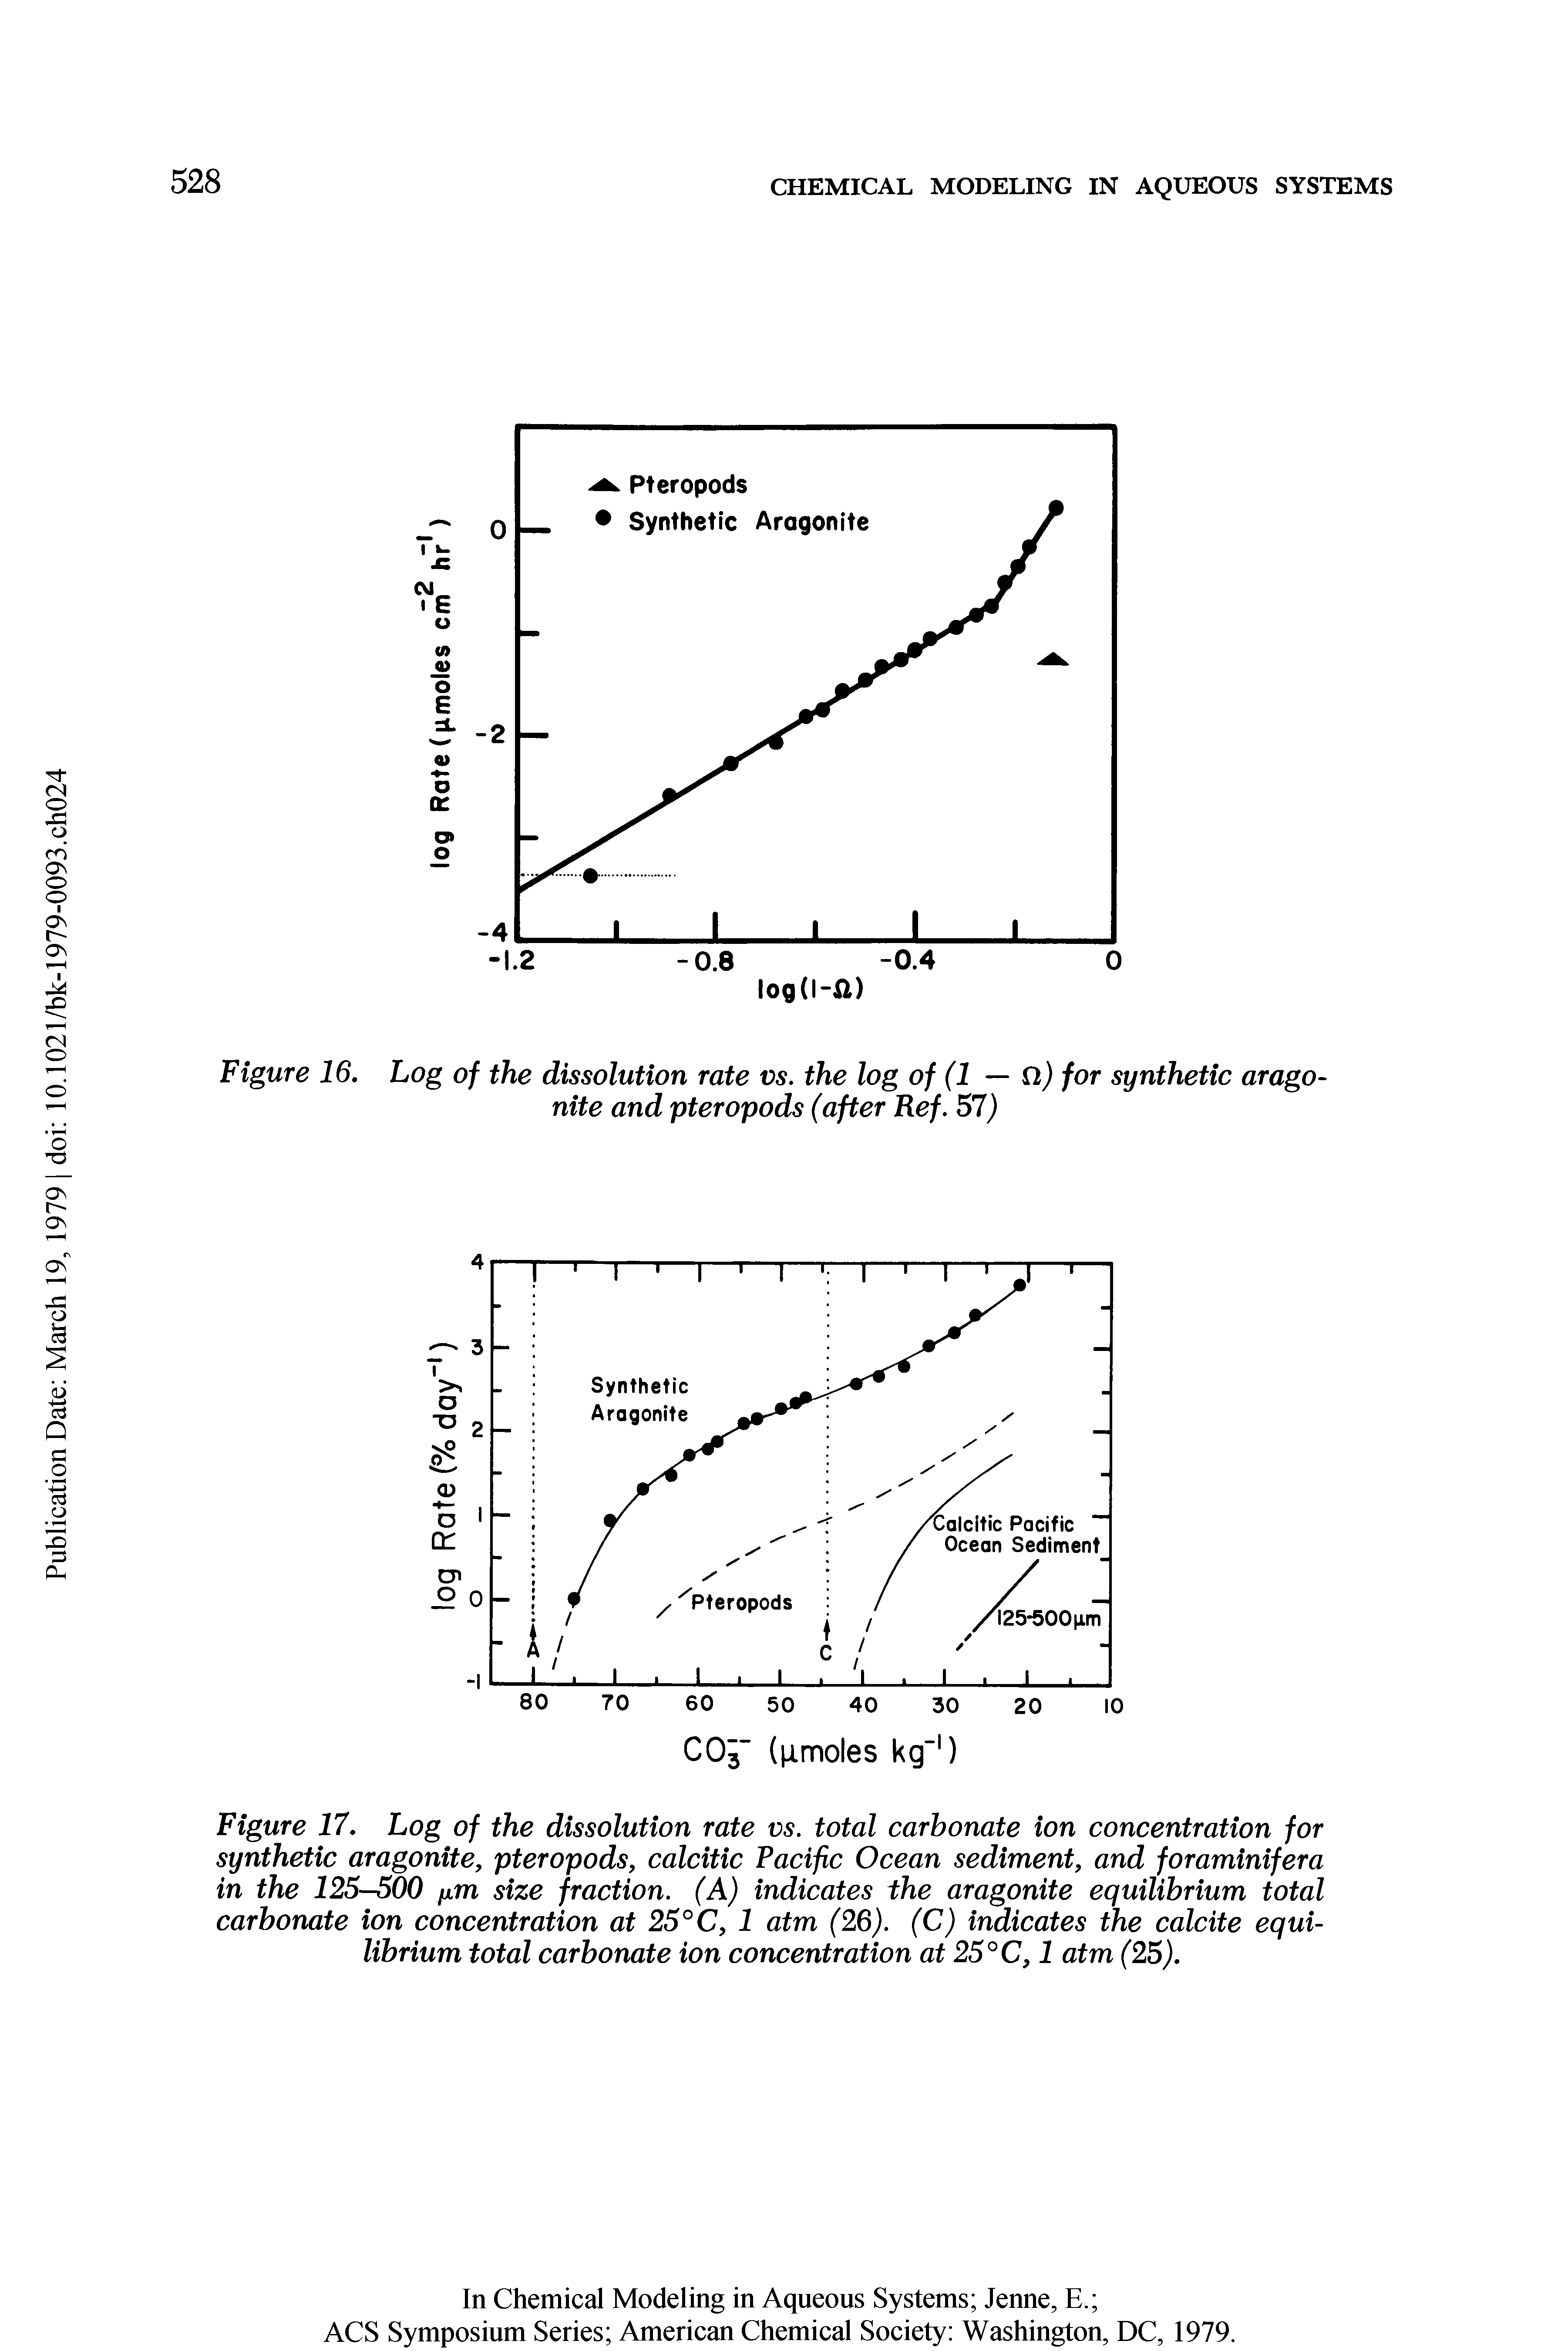 Figure 16. Log of the dissolution rate vs. the log of (1 — Cl) for synthetic aragonite and pteropods (after Ref. 57)...